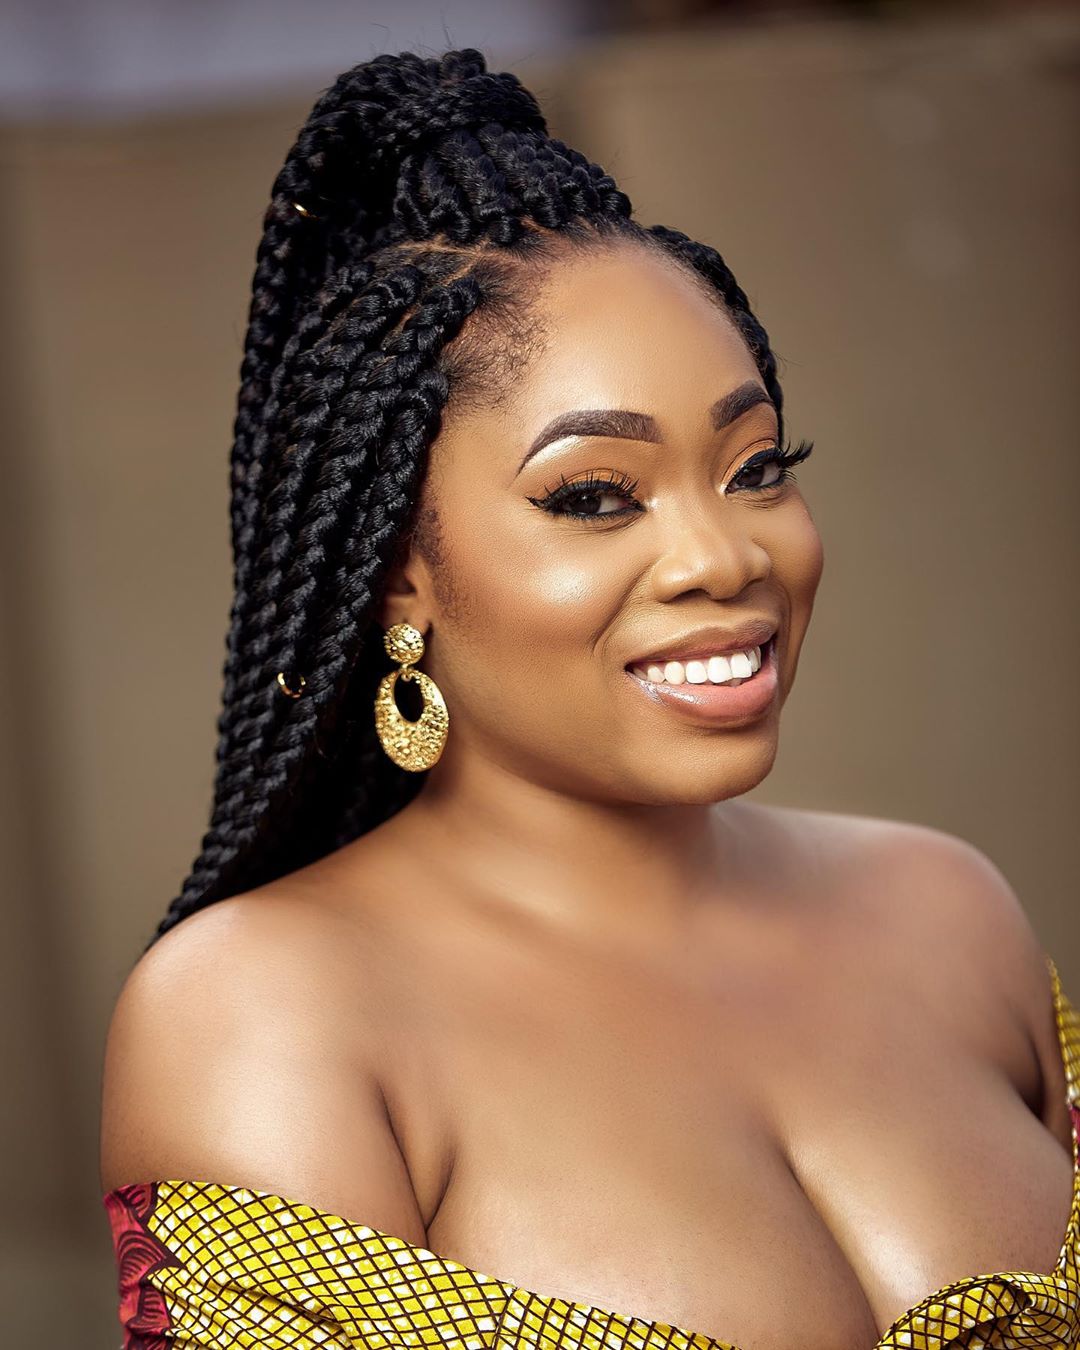 "I Sometimes Think Of Quitting Social Media Because Of Insults" - Moesha Boduong (Screenshot)